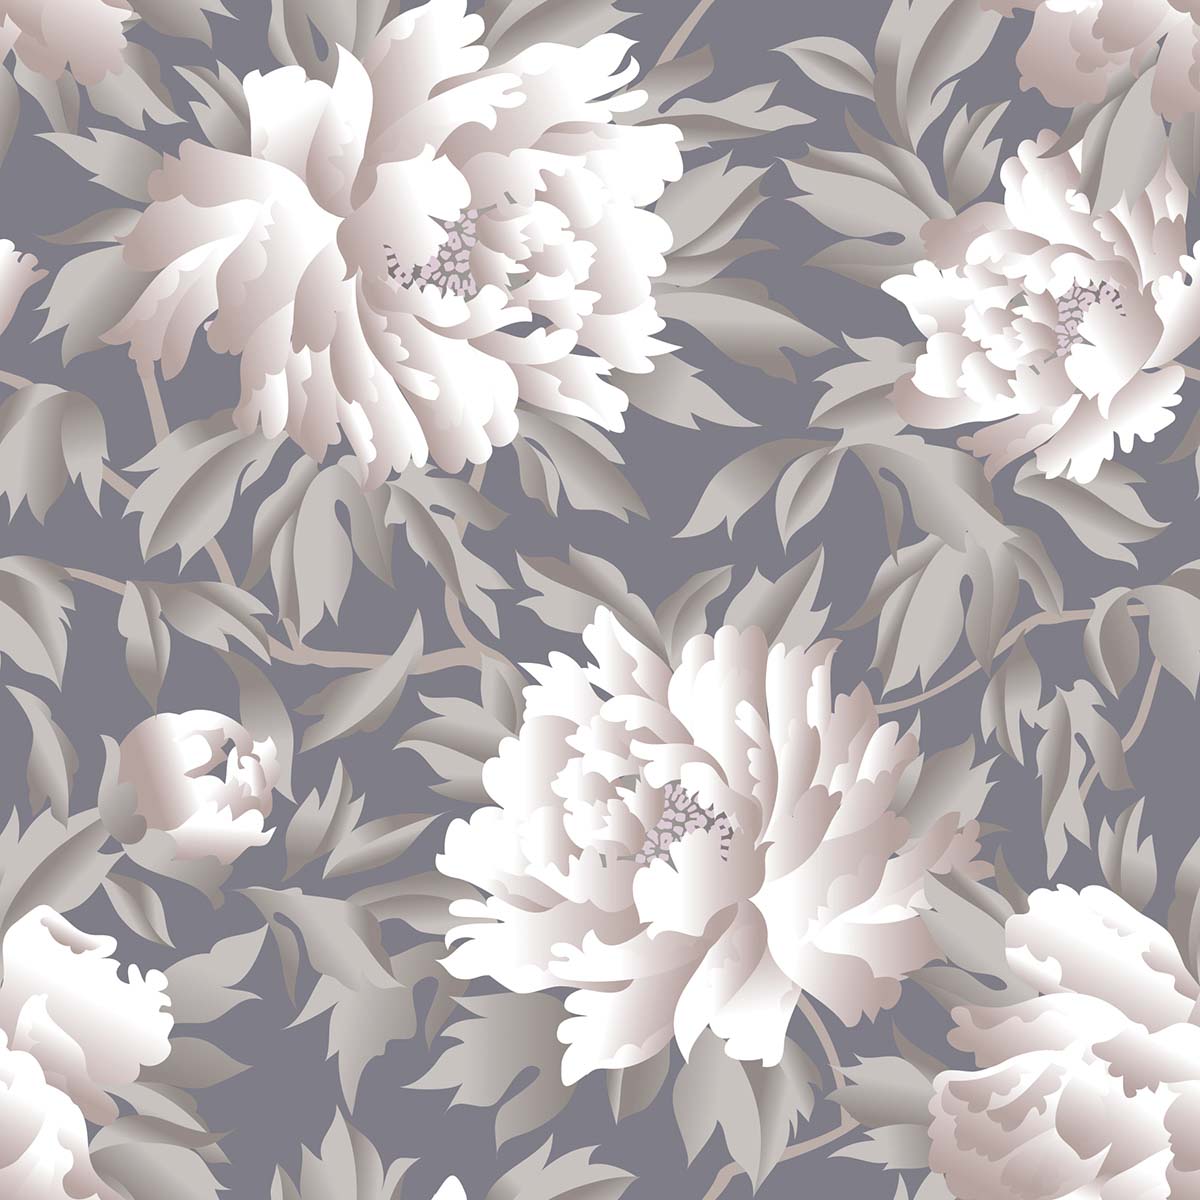 A pattern of white flowers and leaves